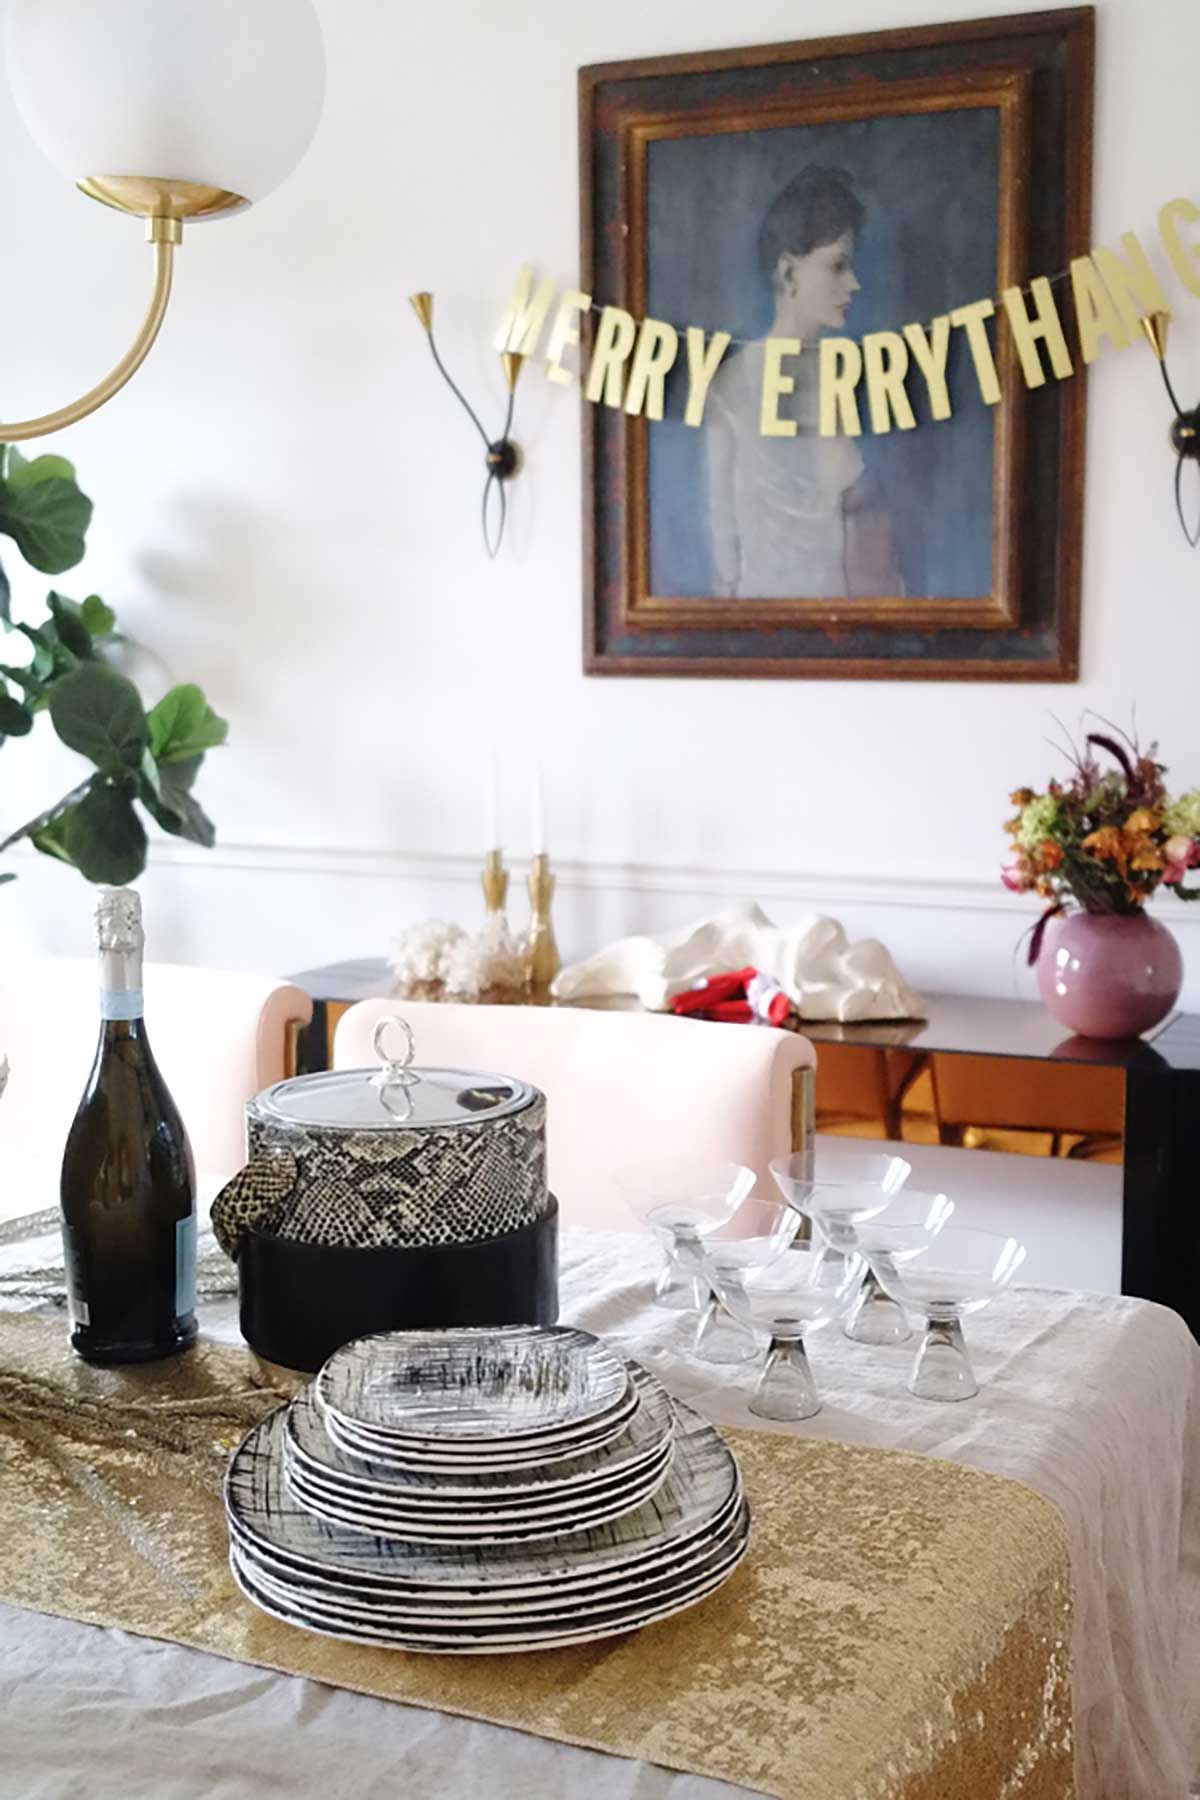 Get my holiday entertaining tips and tricks to help make your hostess duties easier during thanksgiving and Chirstmas